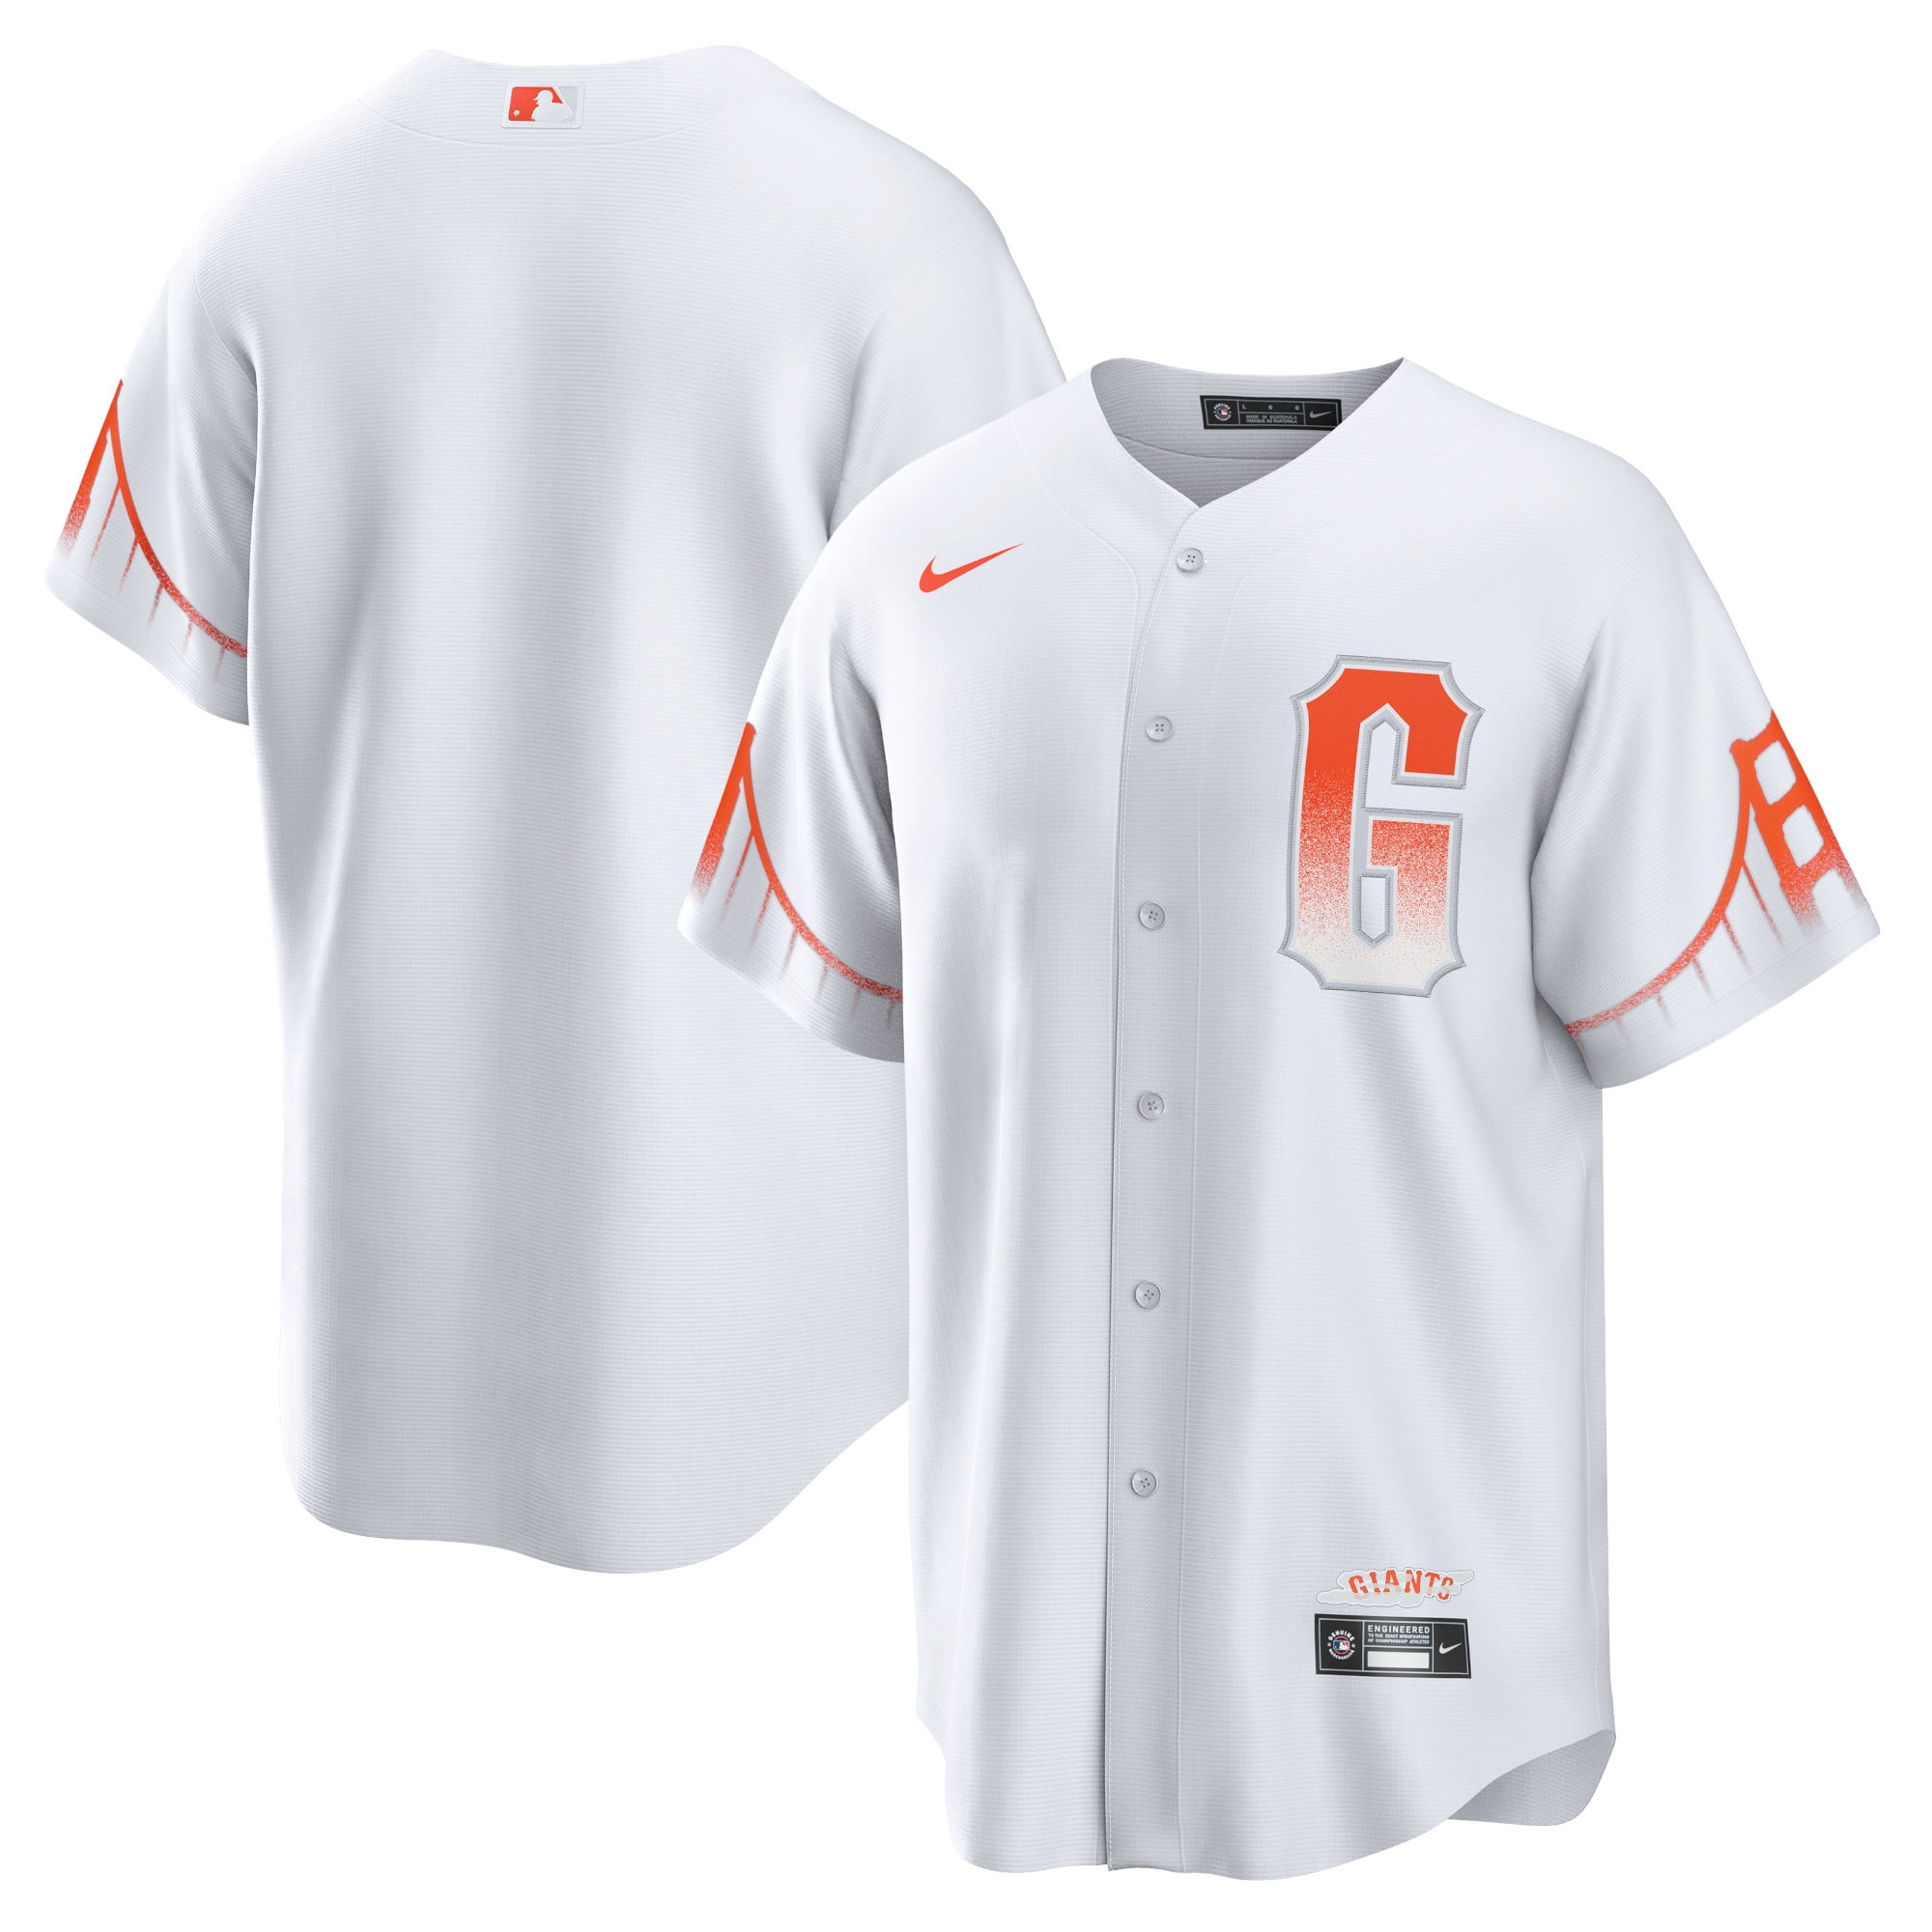 kershaw city connect jersey